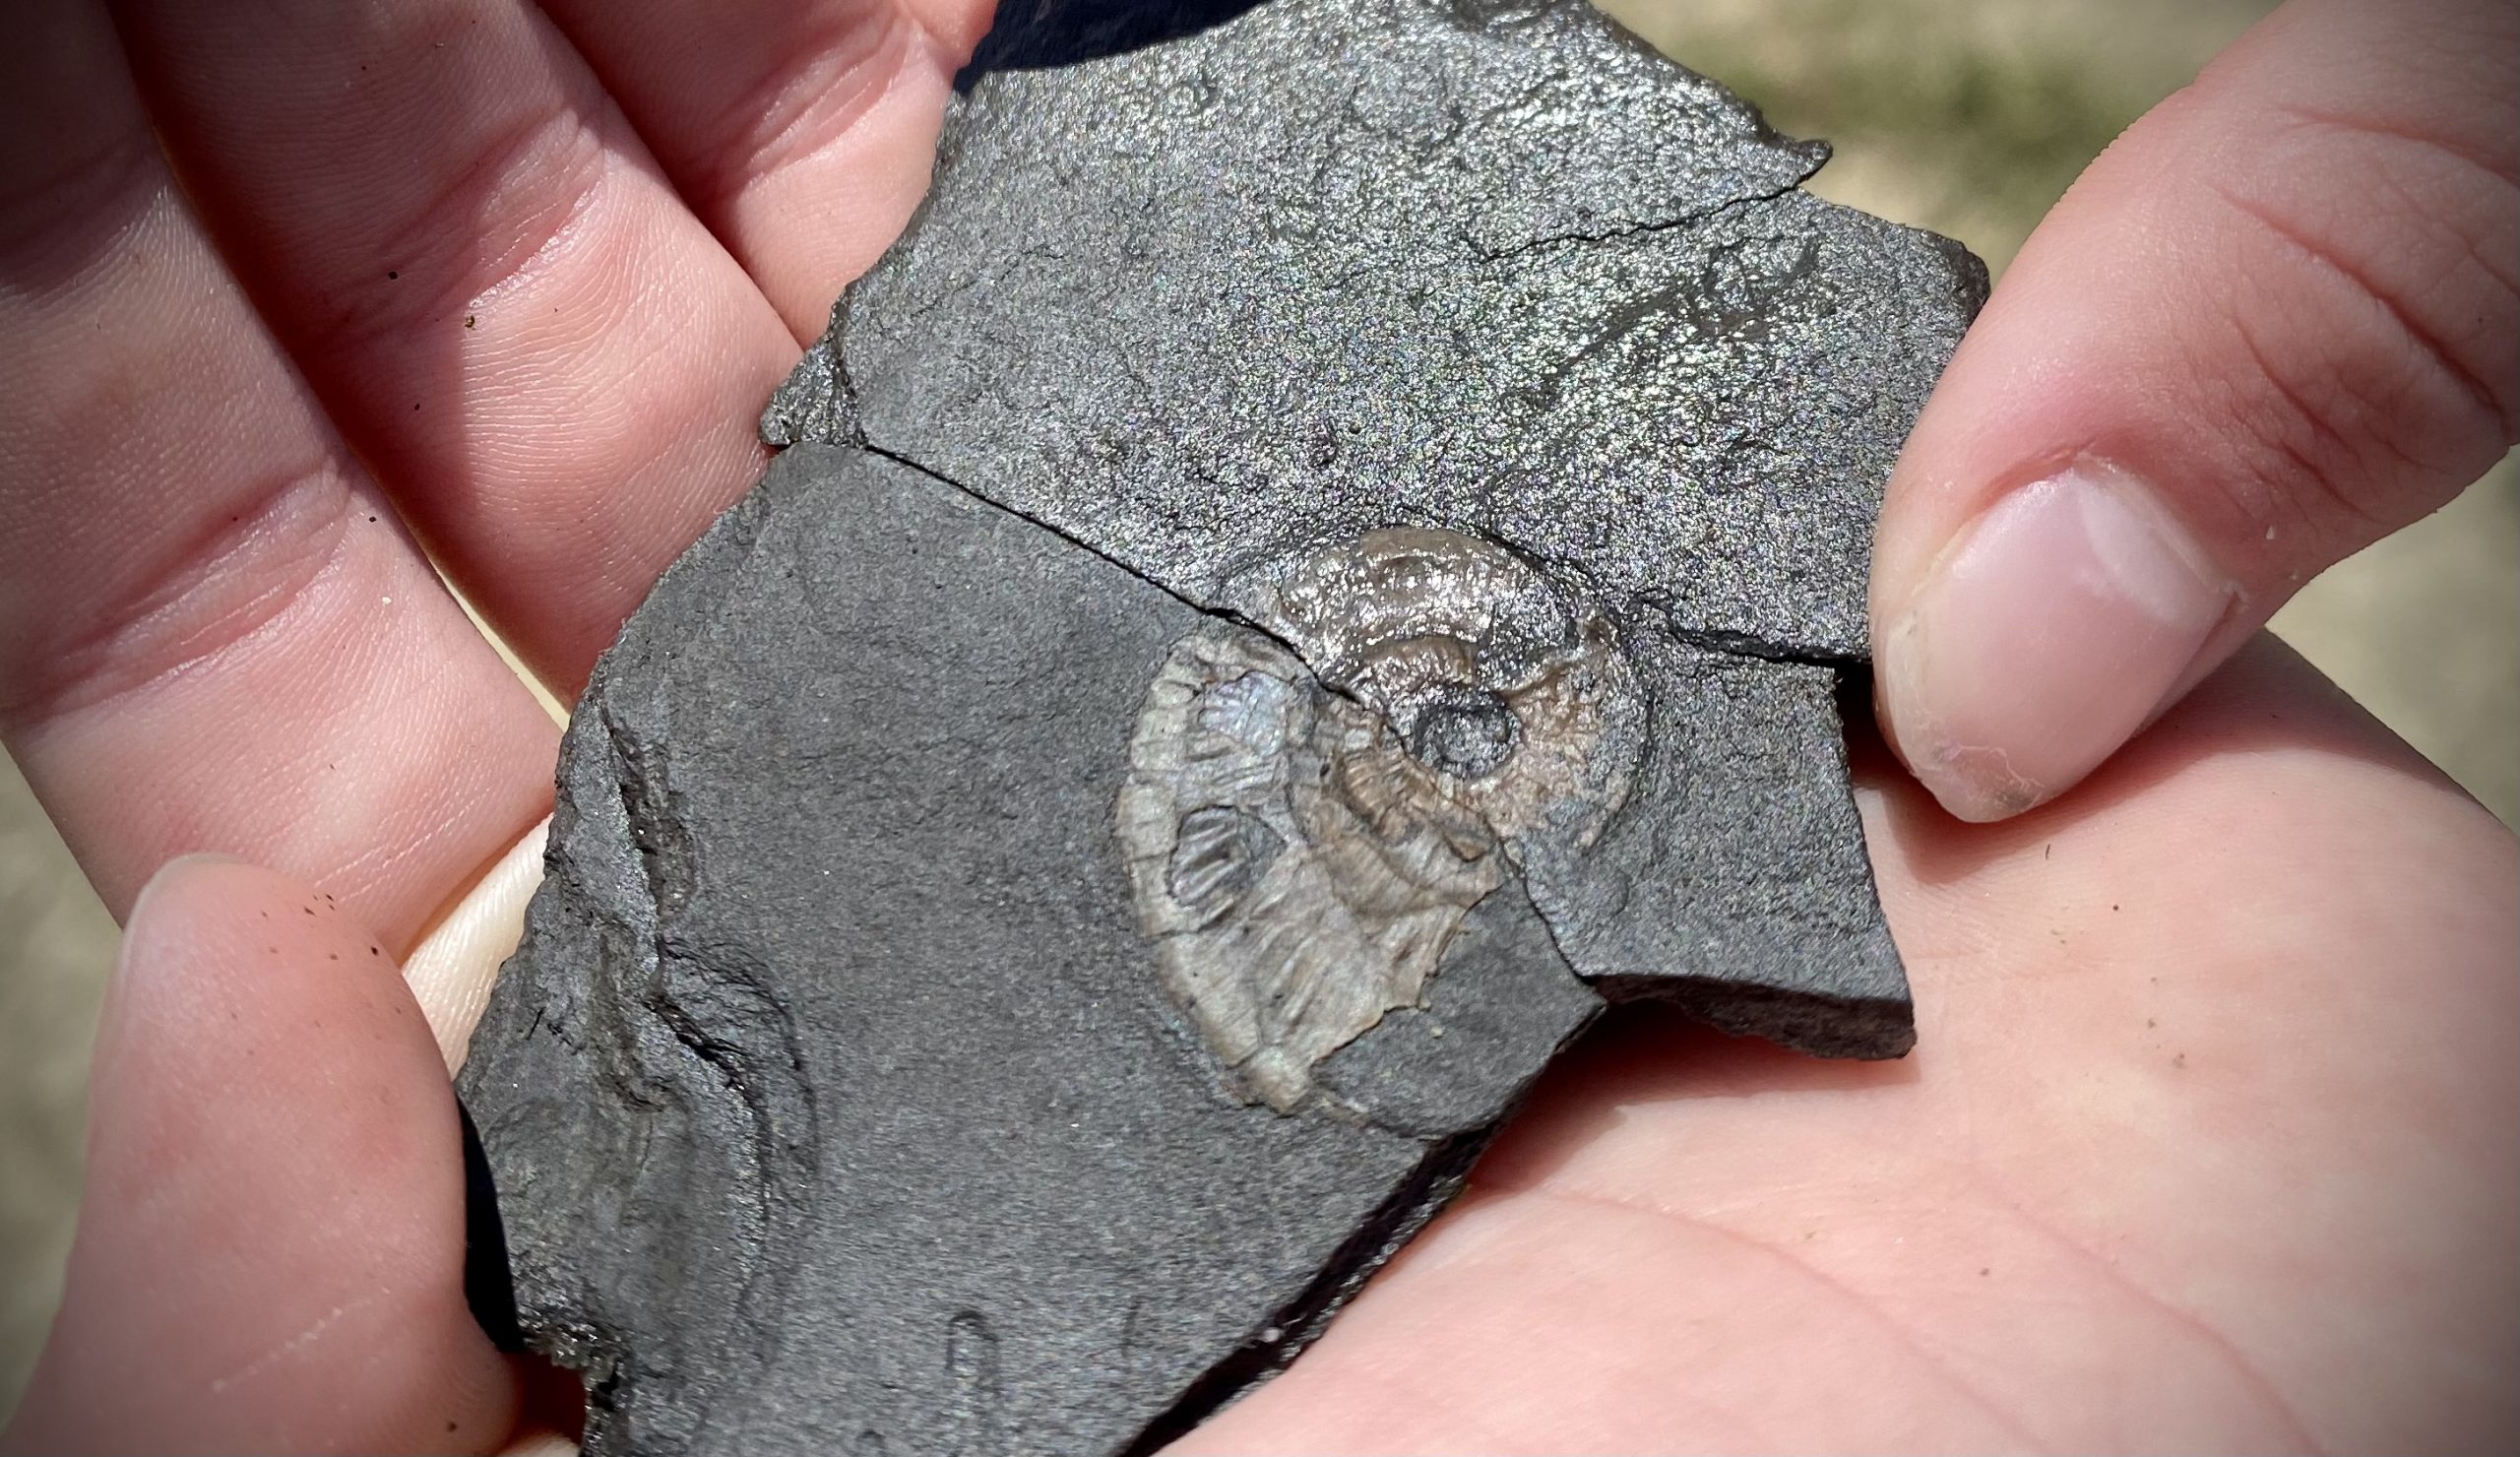 what do you look for when looking for fossils